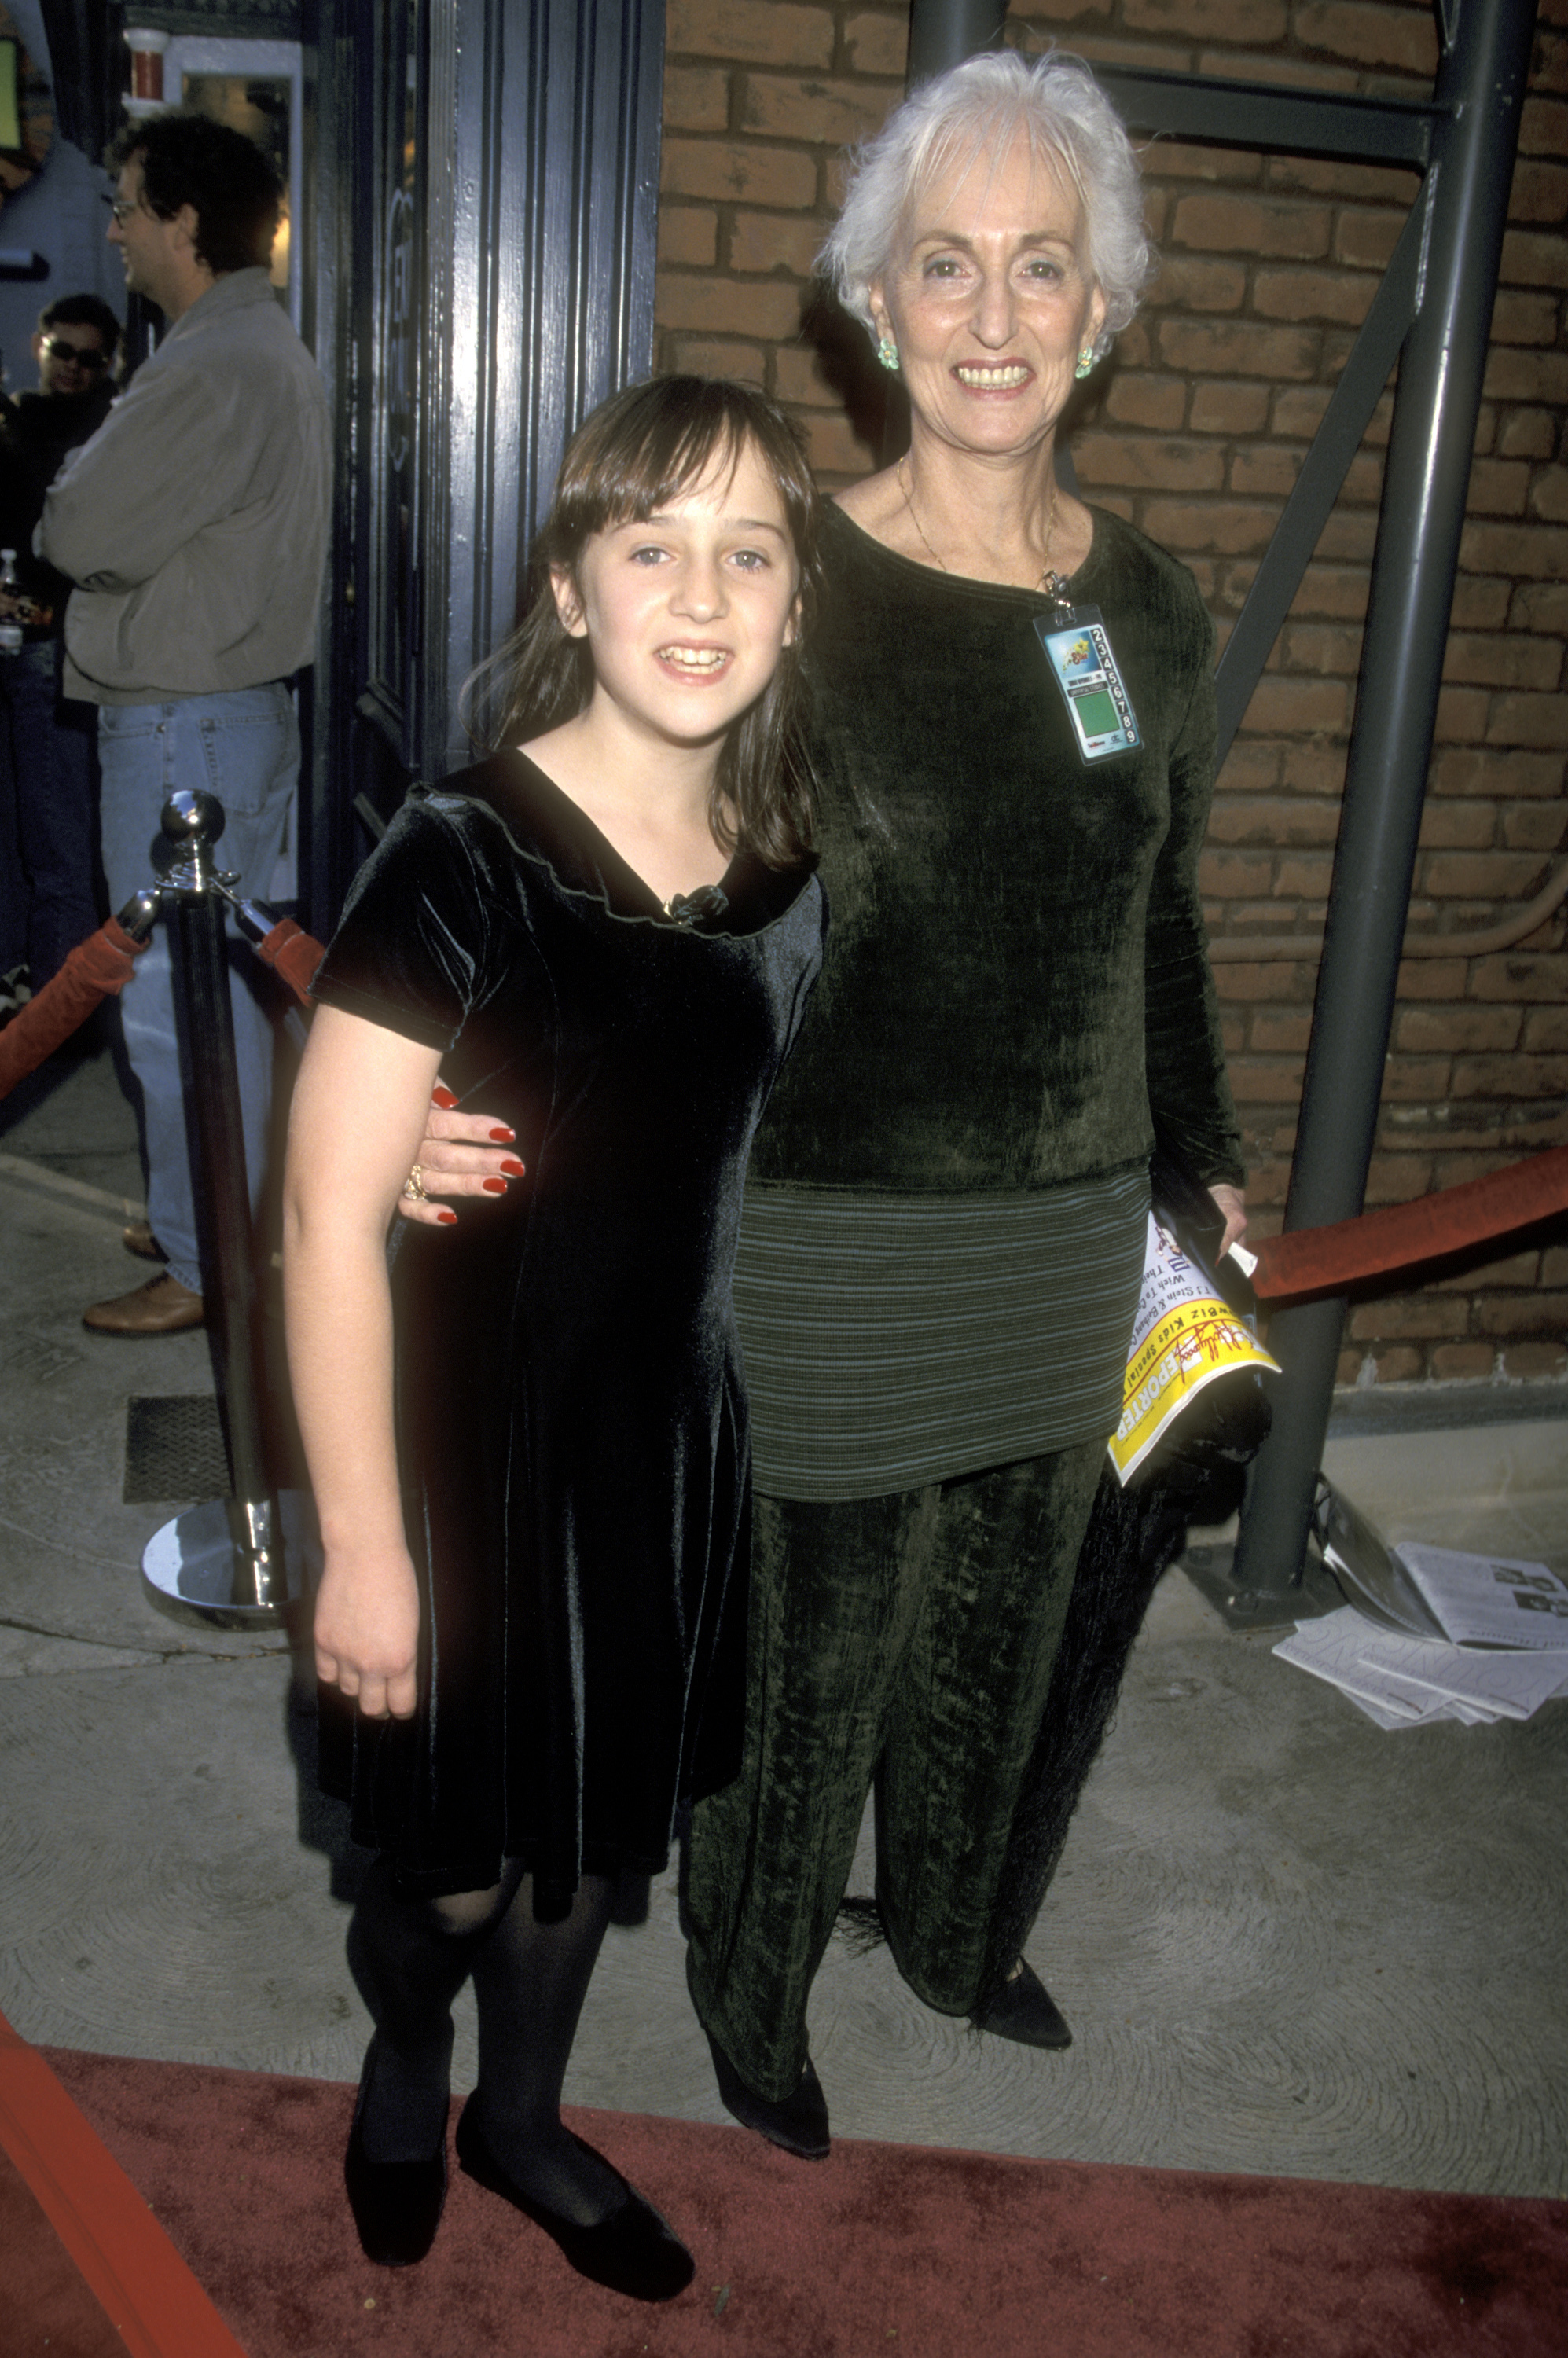 Mara Wilson and grandmother attend The Hollywood Reporter's Third Annual YoungStar Awards at Nickelodeon Theater, Universal Studios in Universal City, California, on November 8, 1998. | Source: Getty Images